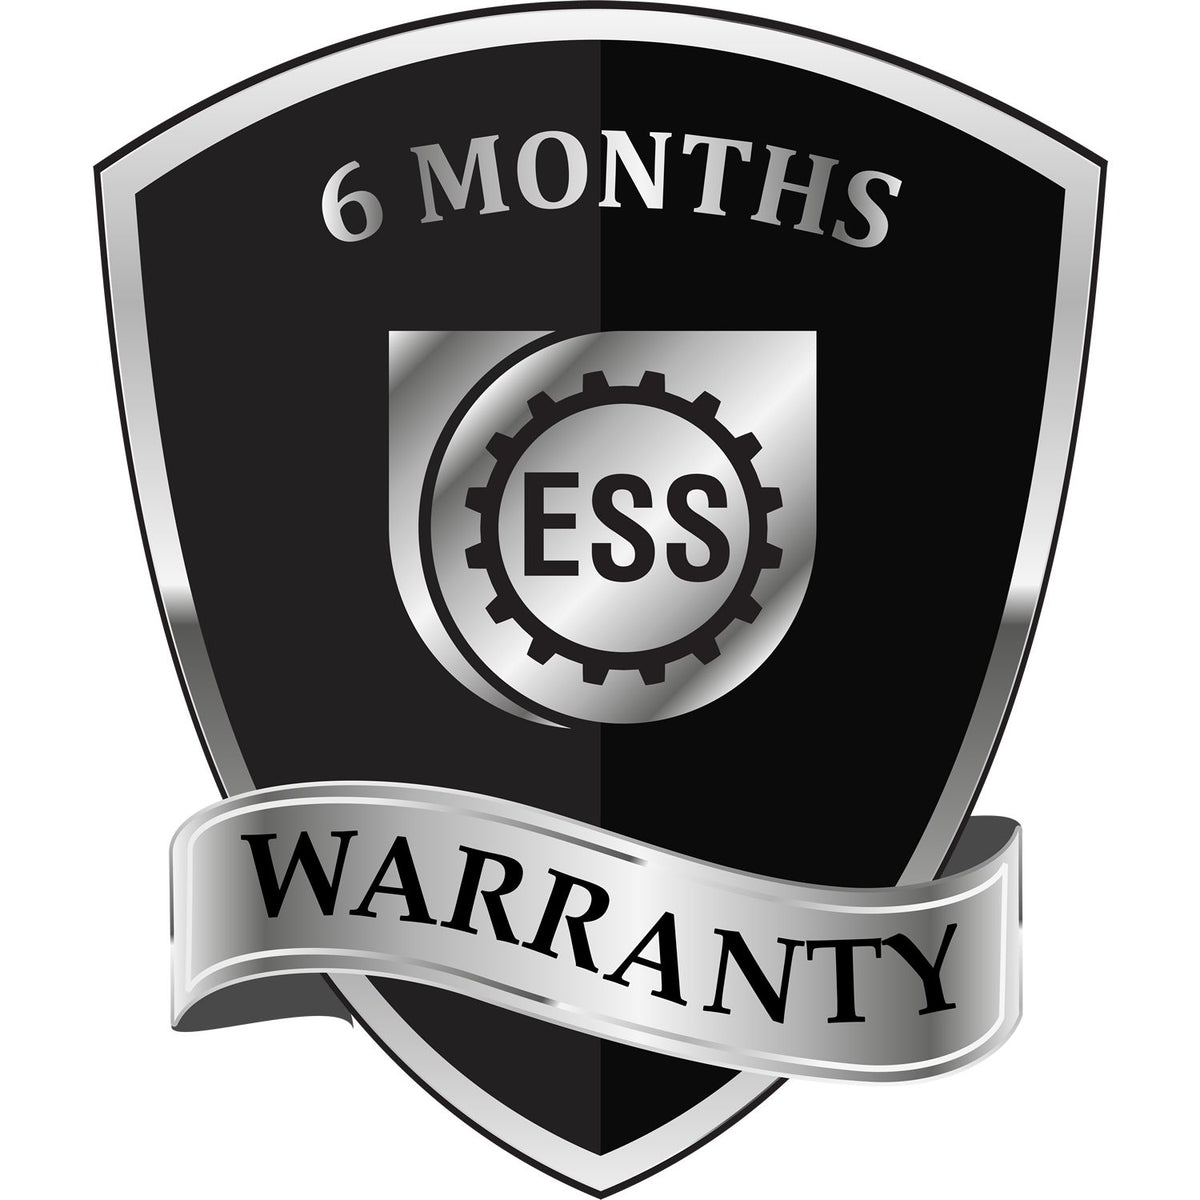 A badge or emblem showing a warranty icon for the Self-Inking Arizona PE Stamp